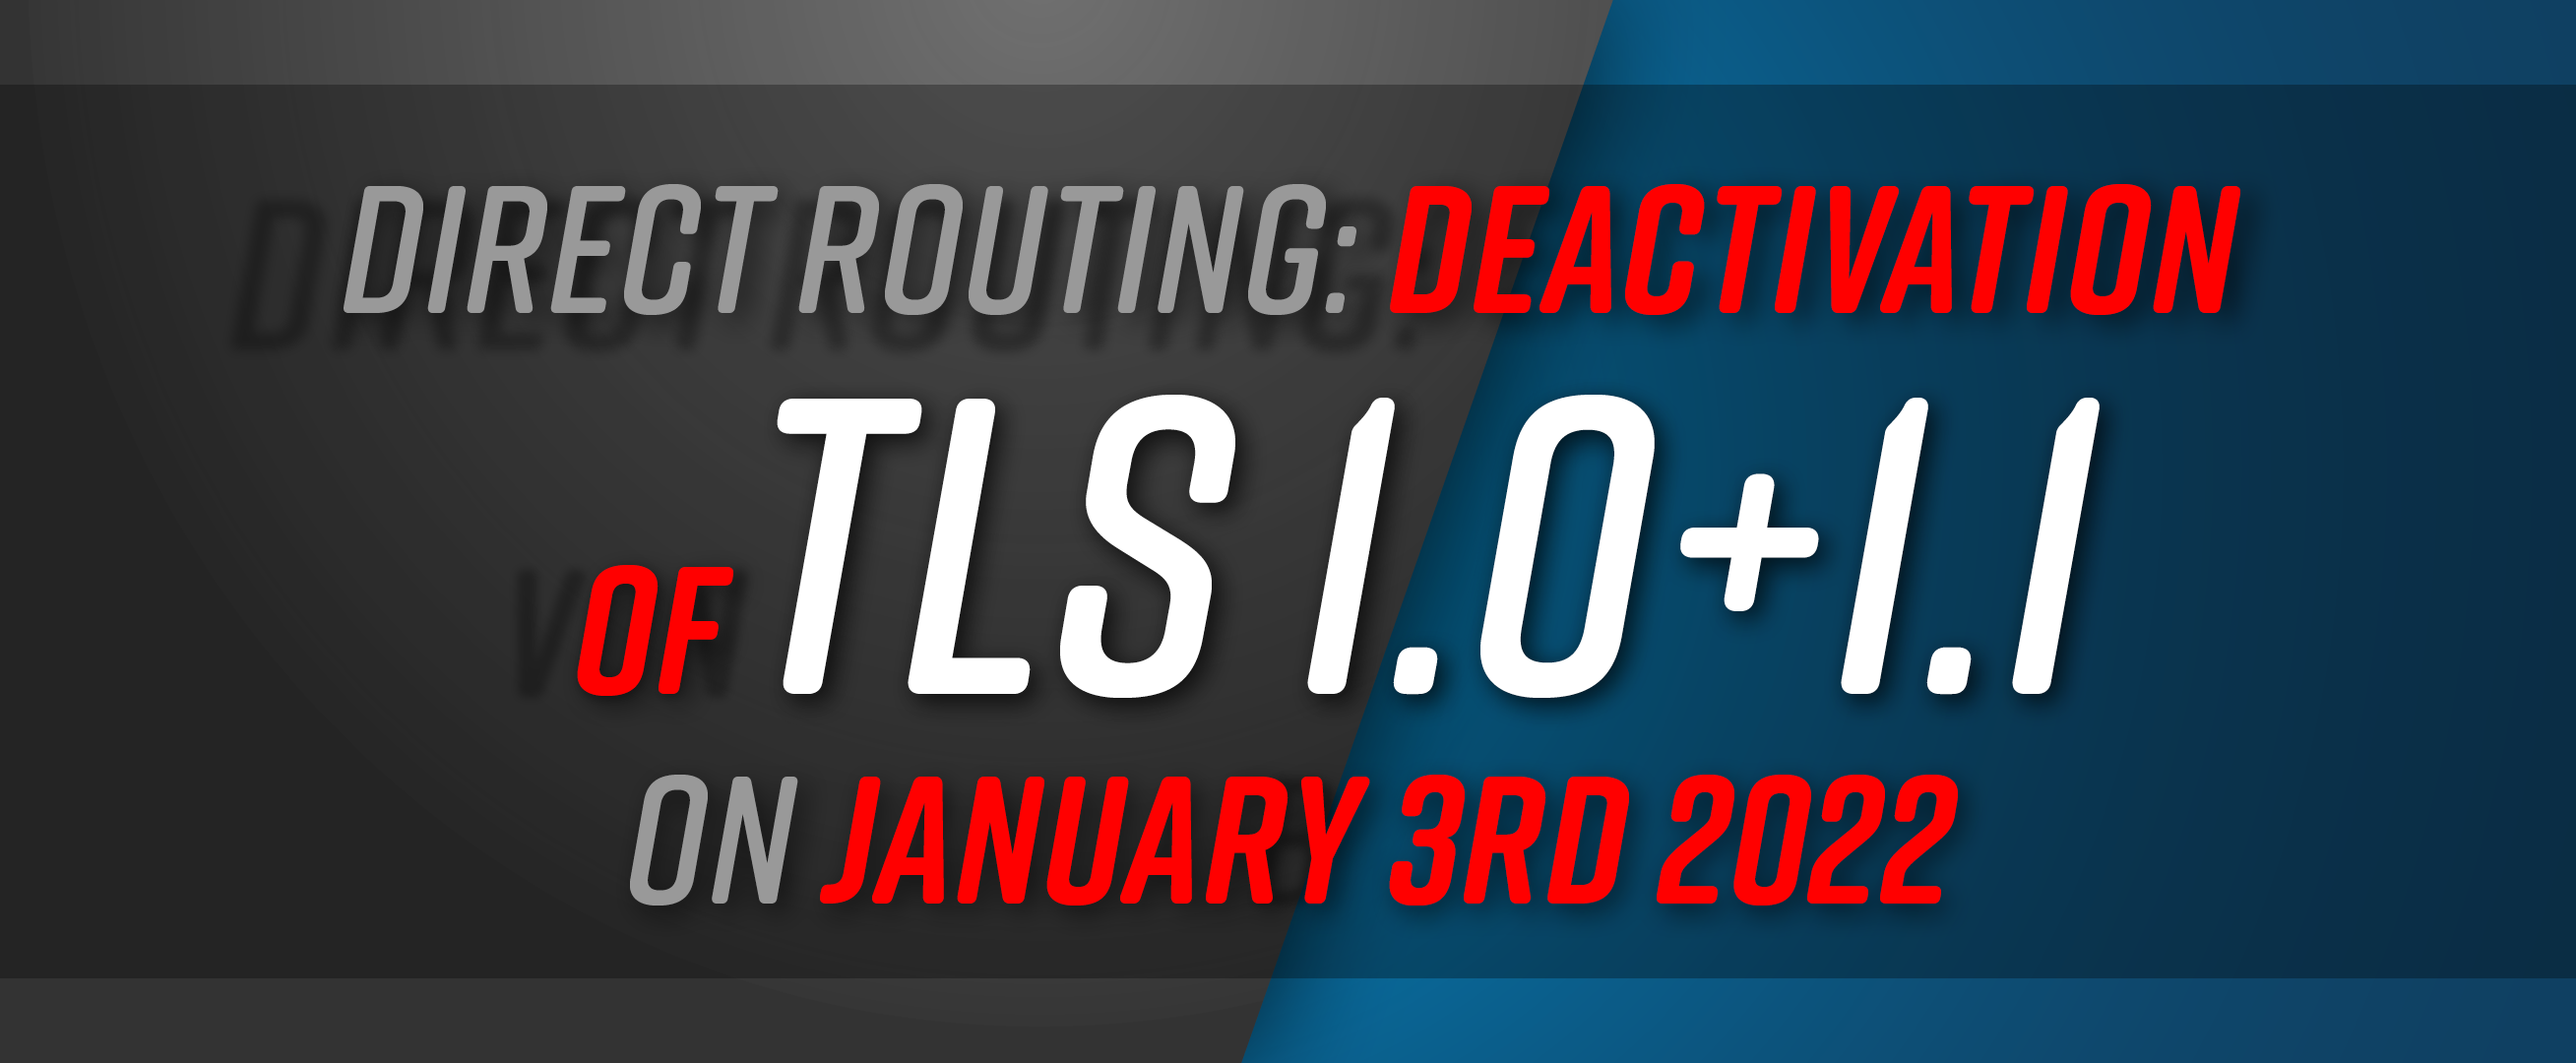 Deactivation of Transport Layer Security (TLS) 1.0 and 1.1 on the direct routing interface on January 3rd, 2022 by Microsoft.